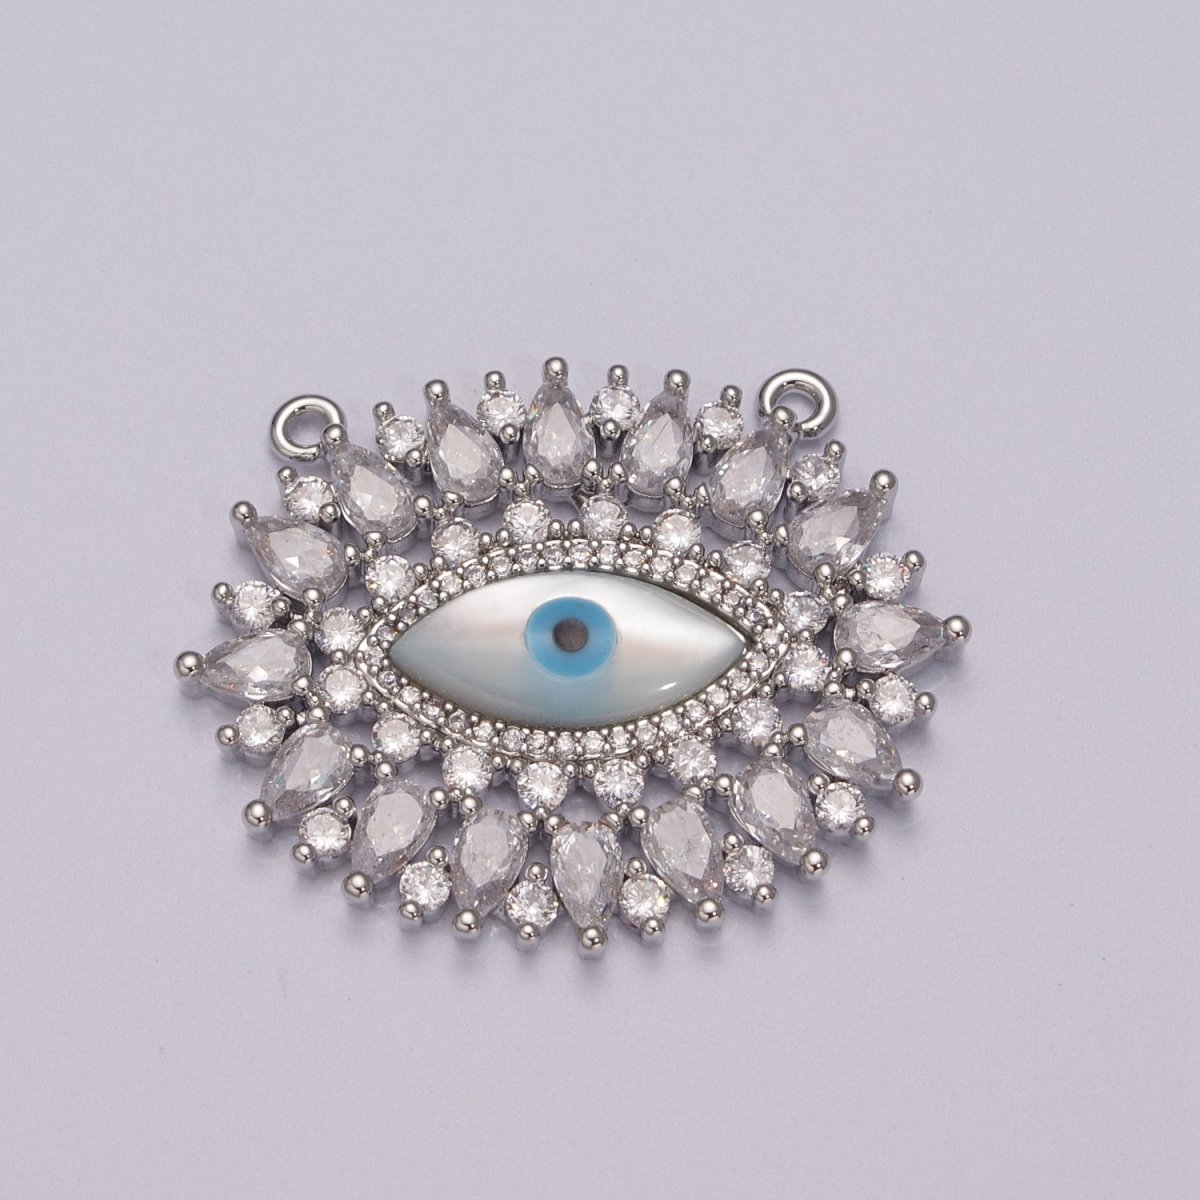 14K Gold Filled Evil Eye Charm, CZ Micro Pave Sparkly Statement Charm Connector for Necklace Jewelry Making Amulet Talisman Jewelry N-071 - N-074 - DLUXCA